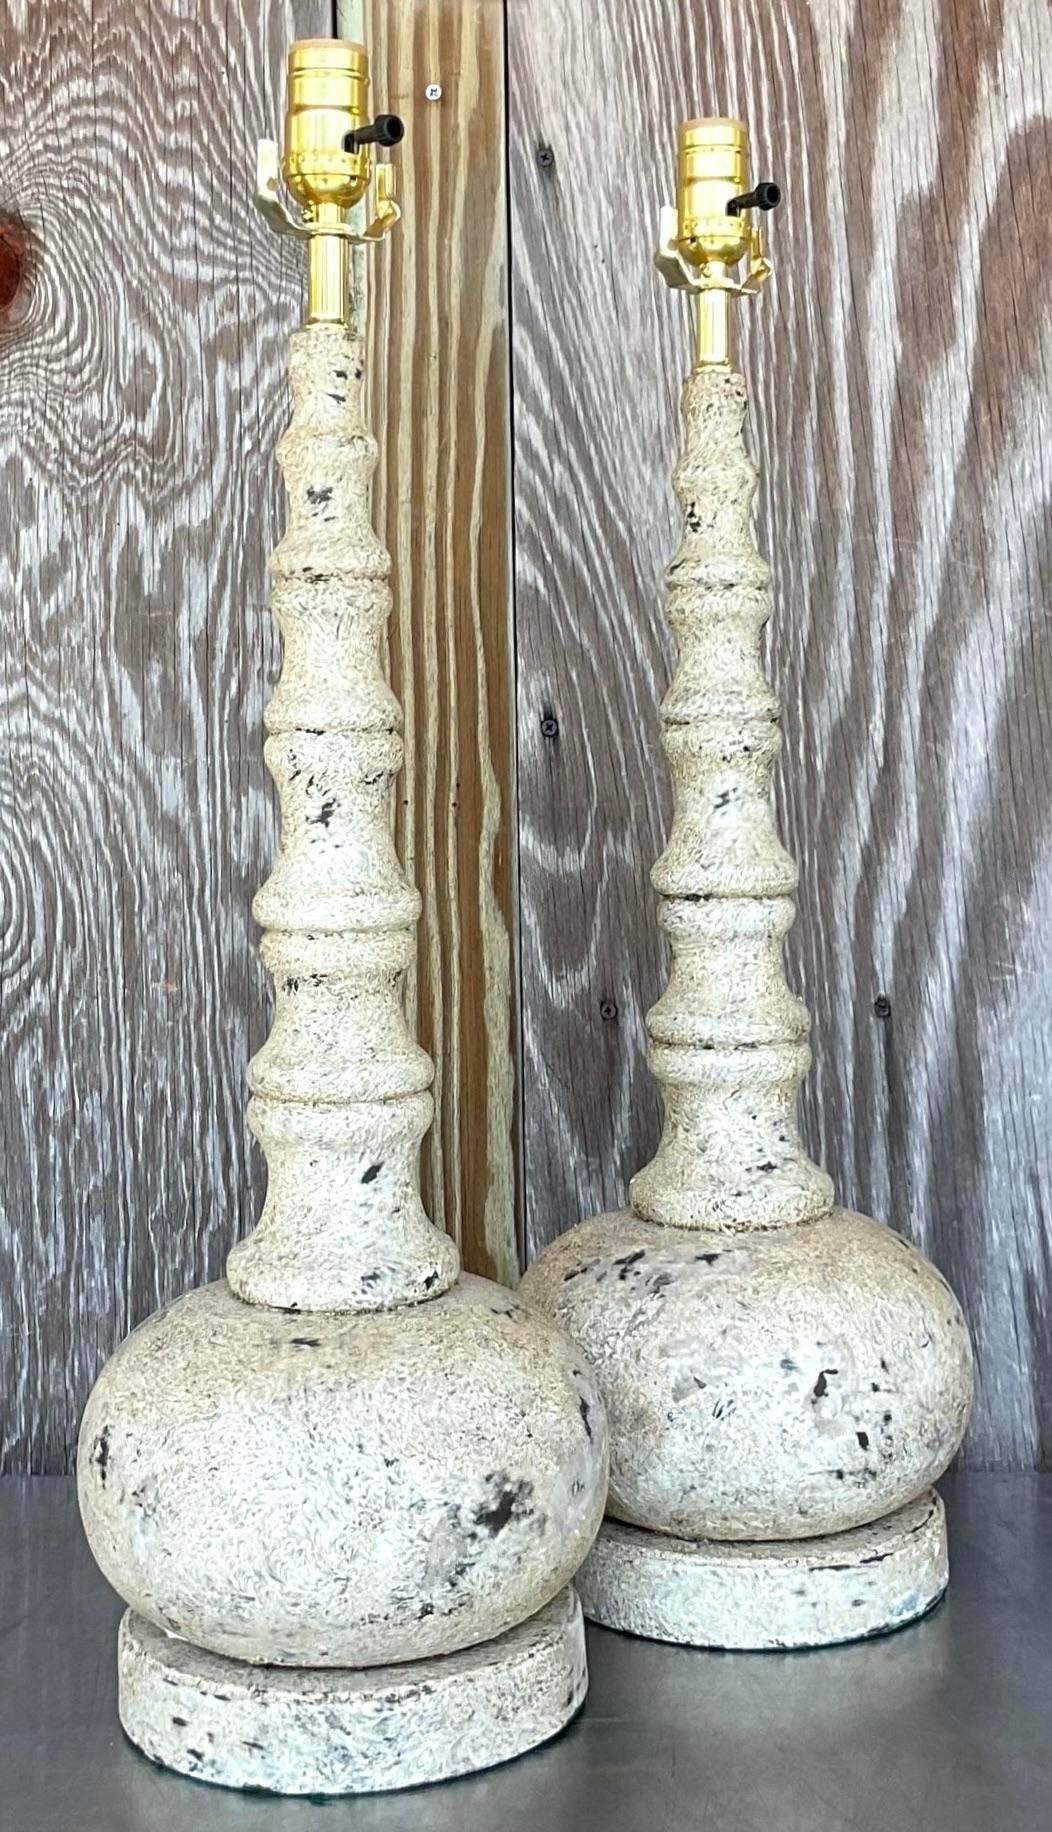 Light up your space with our Vintage Boho Patinated Long Neck Lamps - A Pair. These stylish lamps feature a unique patinated finish and long neck design, blending Bohemian flair with American craftsmanship. A chic duo that adds character and